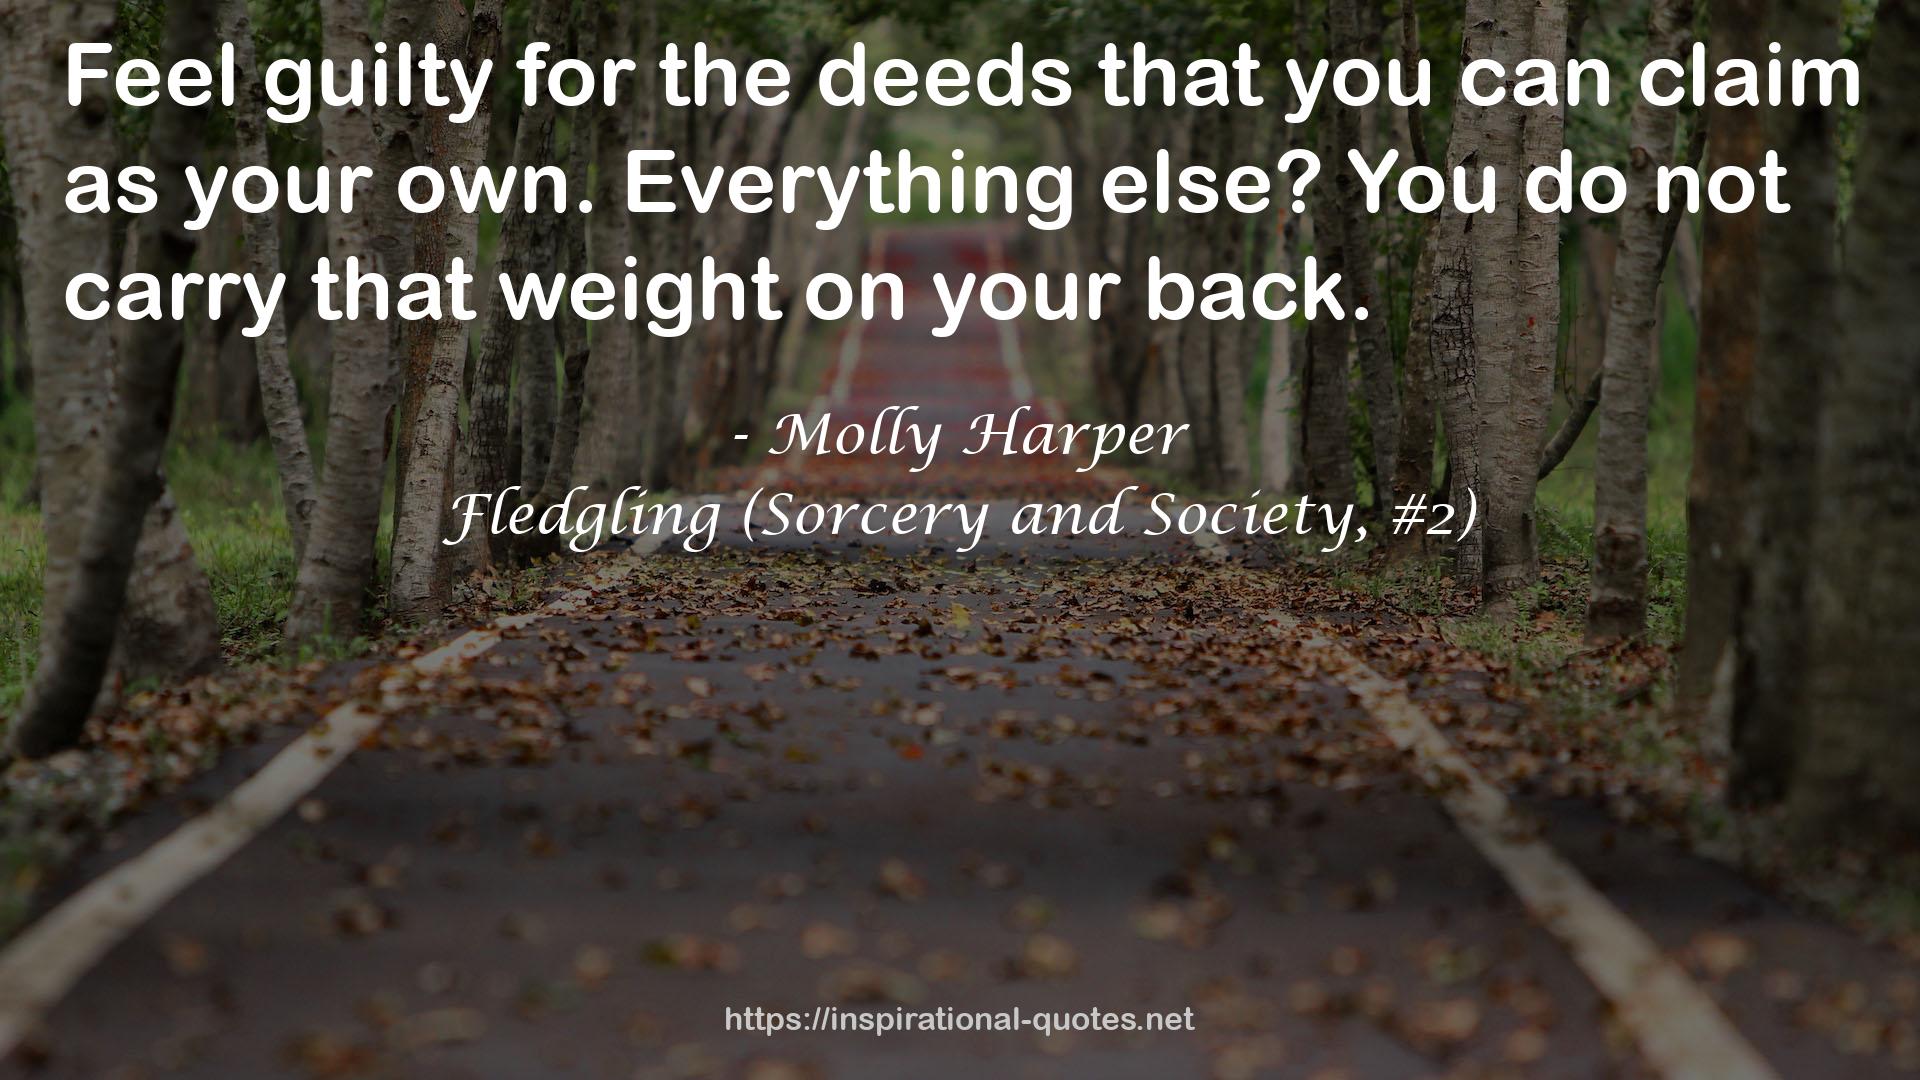 Fledgling (Sorcery and Society, #2) QUOTES